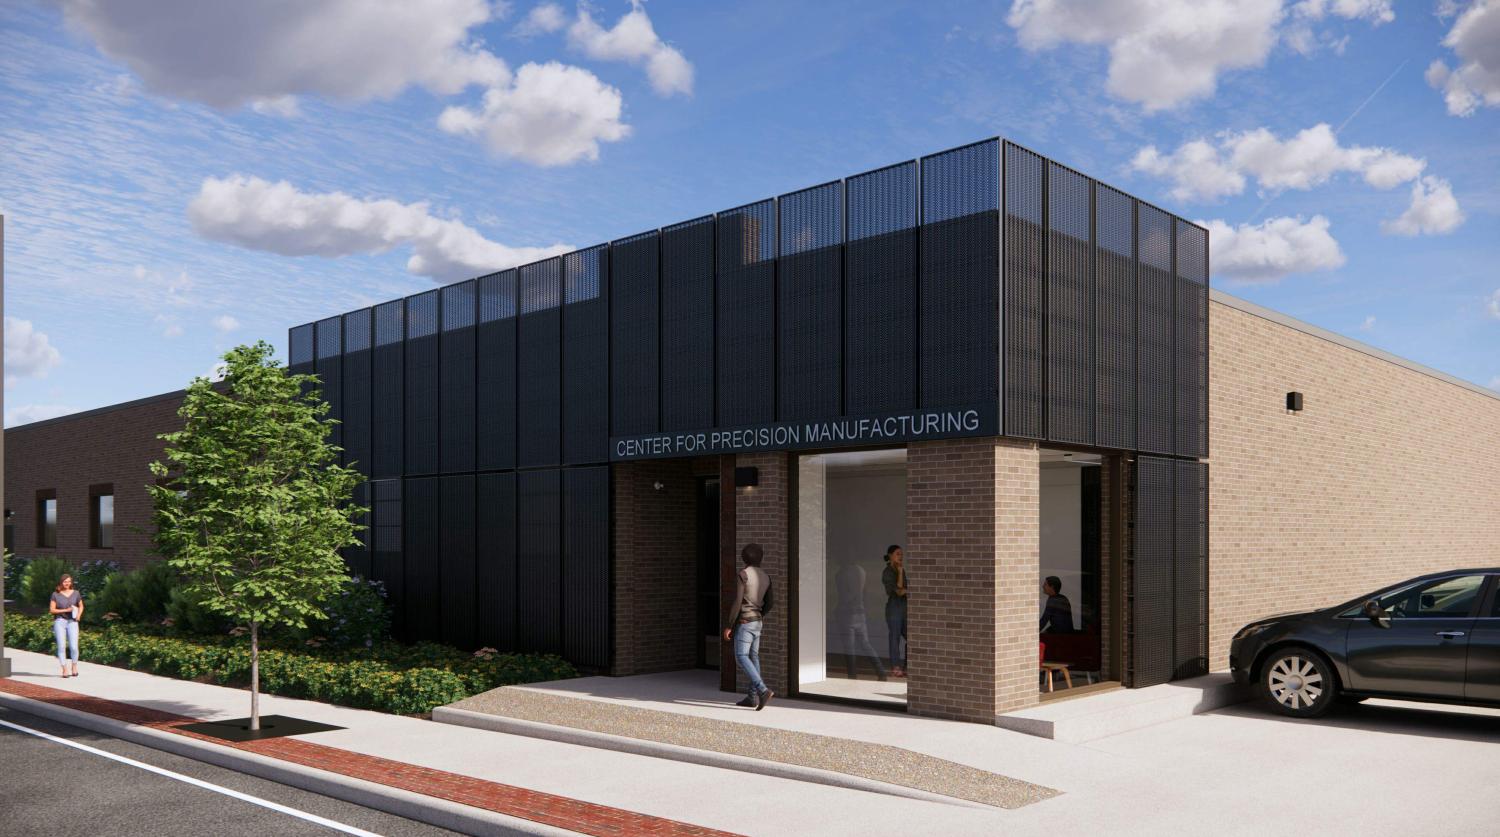 Rendering of Center for Precision Manufacturing